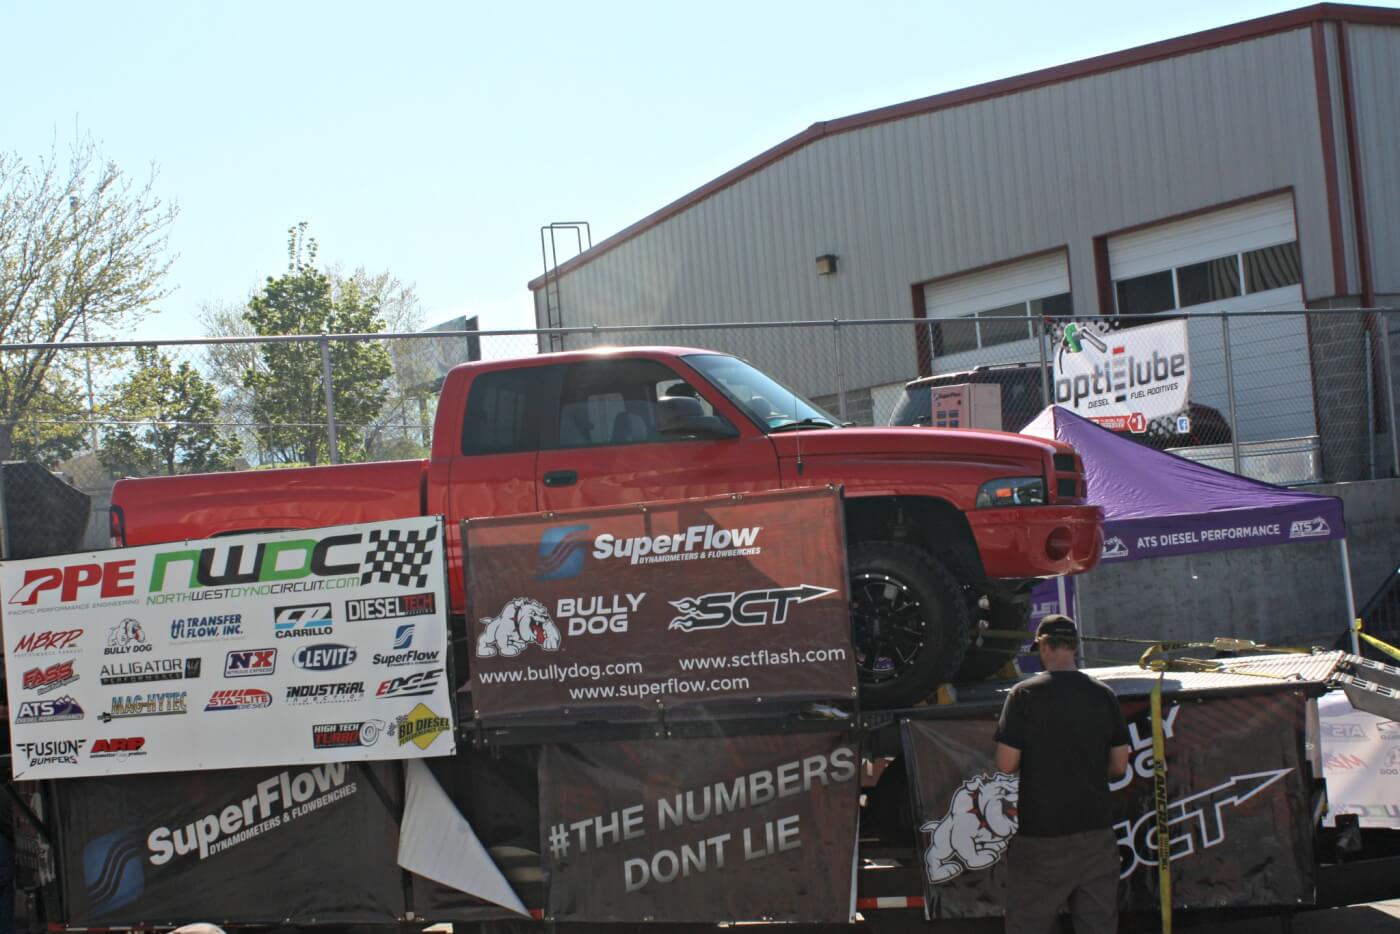 Competitors and spectators couldn’t have asked for better weather for a little Saturday diesel-junky get together in April. With temperatures in the high 70s, over 40 trucks were able to get on the dyno and flex their muscle. Joey Leeper’s clean 2002 24V stock turbo Cummins put down a respectable 378 hp.